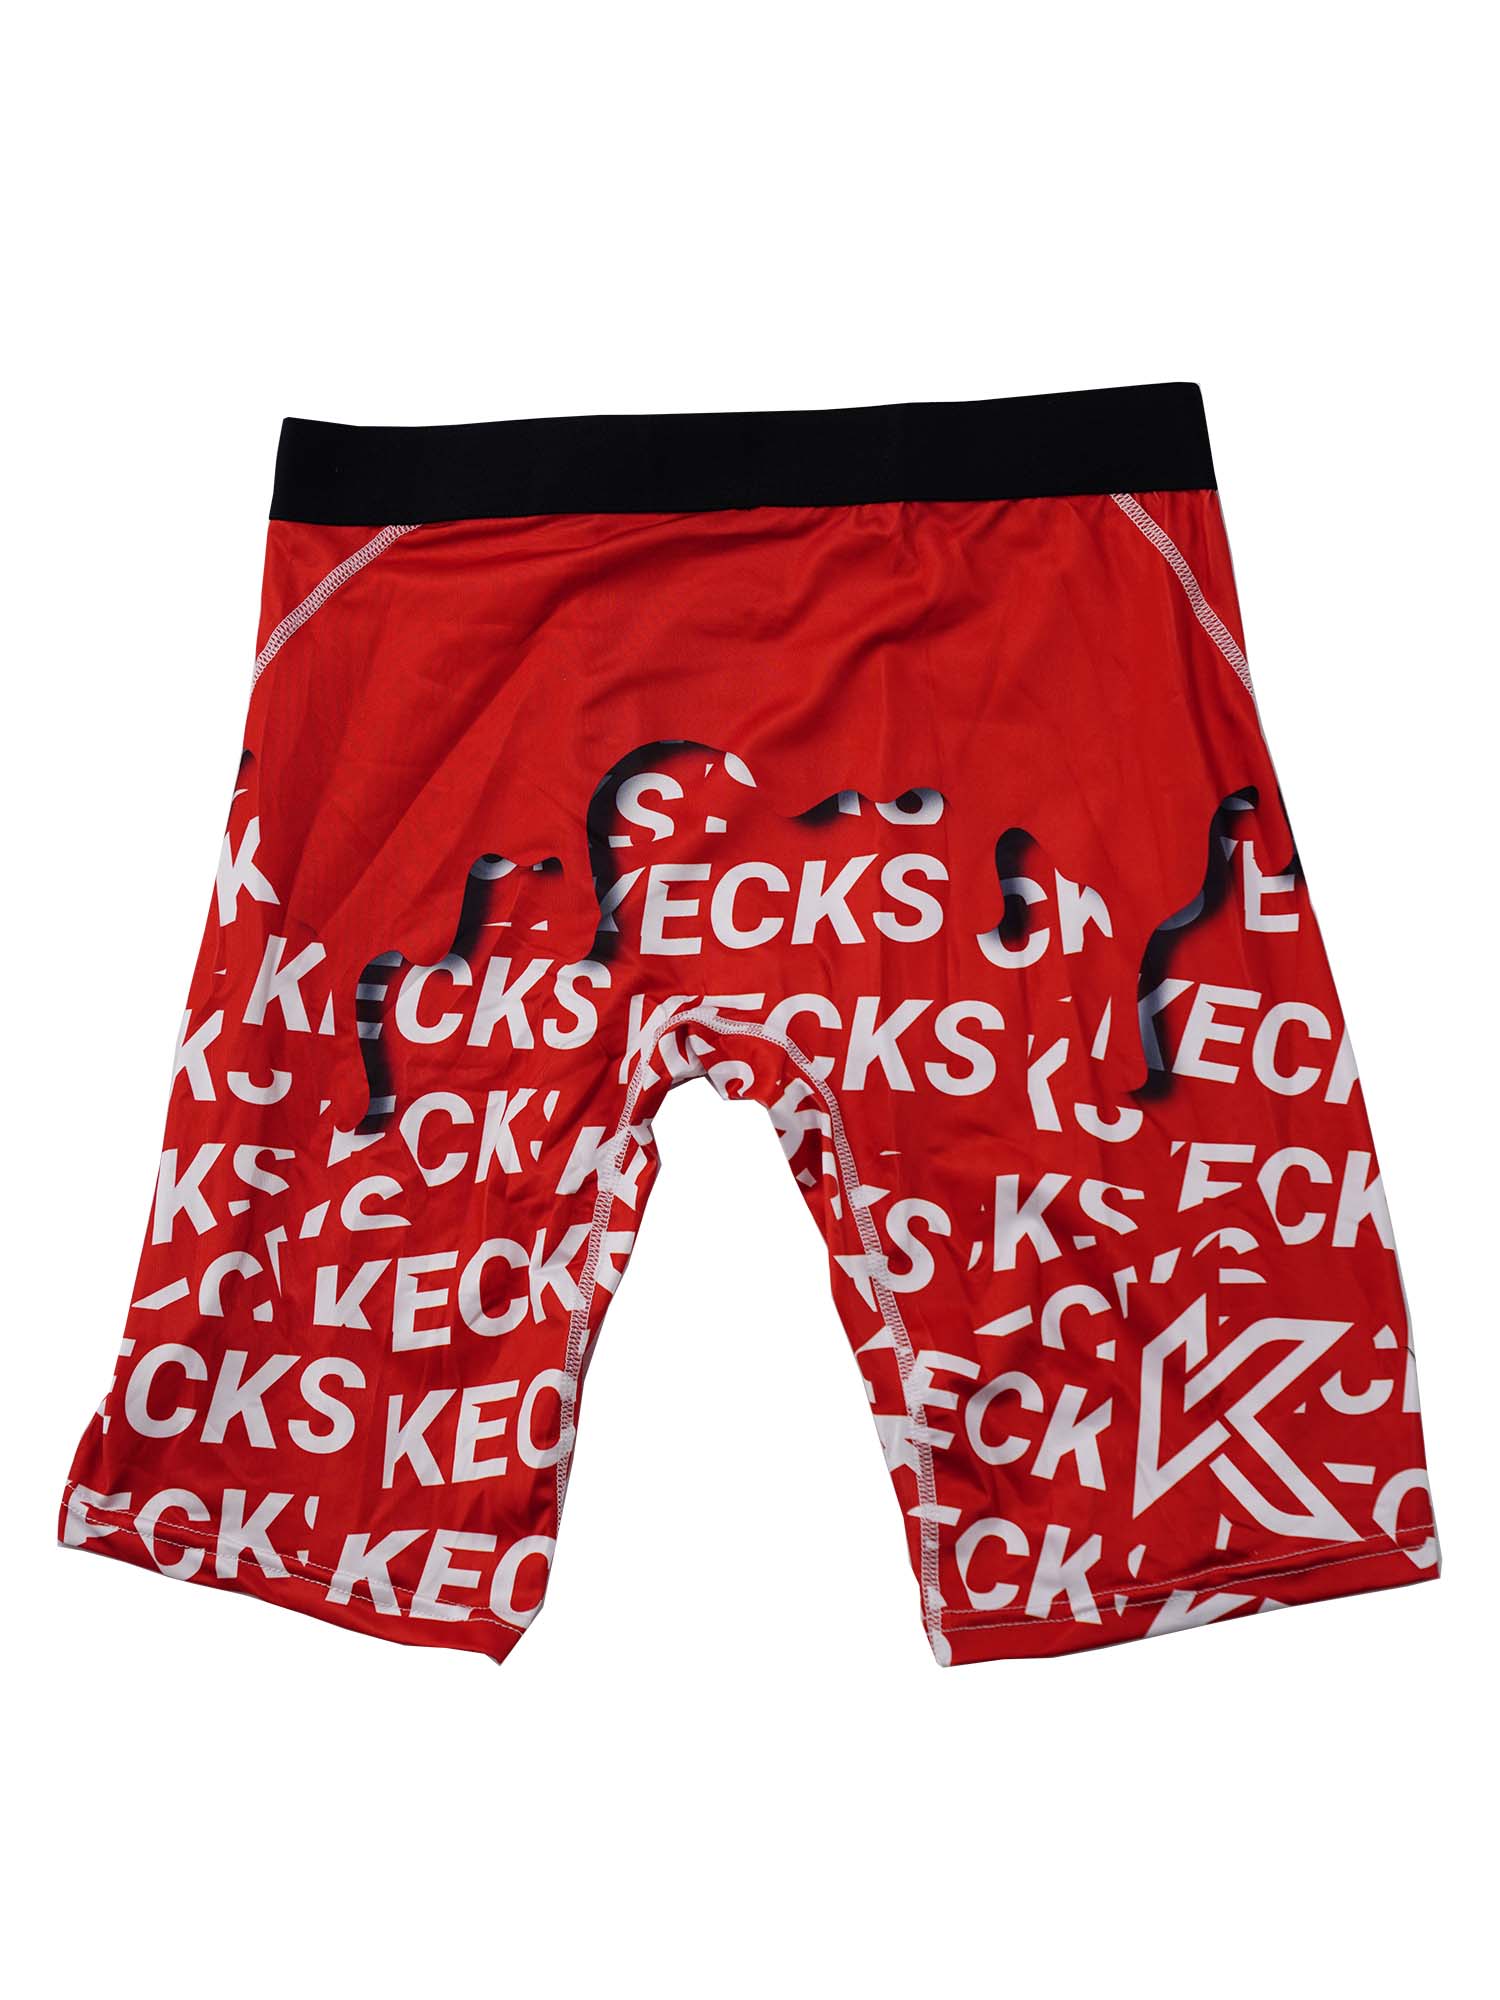 Mens Novelty Kecks Boxers Breathable Comfortable Stretch Adult Teens  Underwear, Shop Now For Limited-time Deals